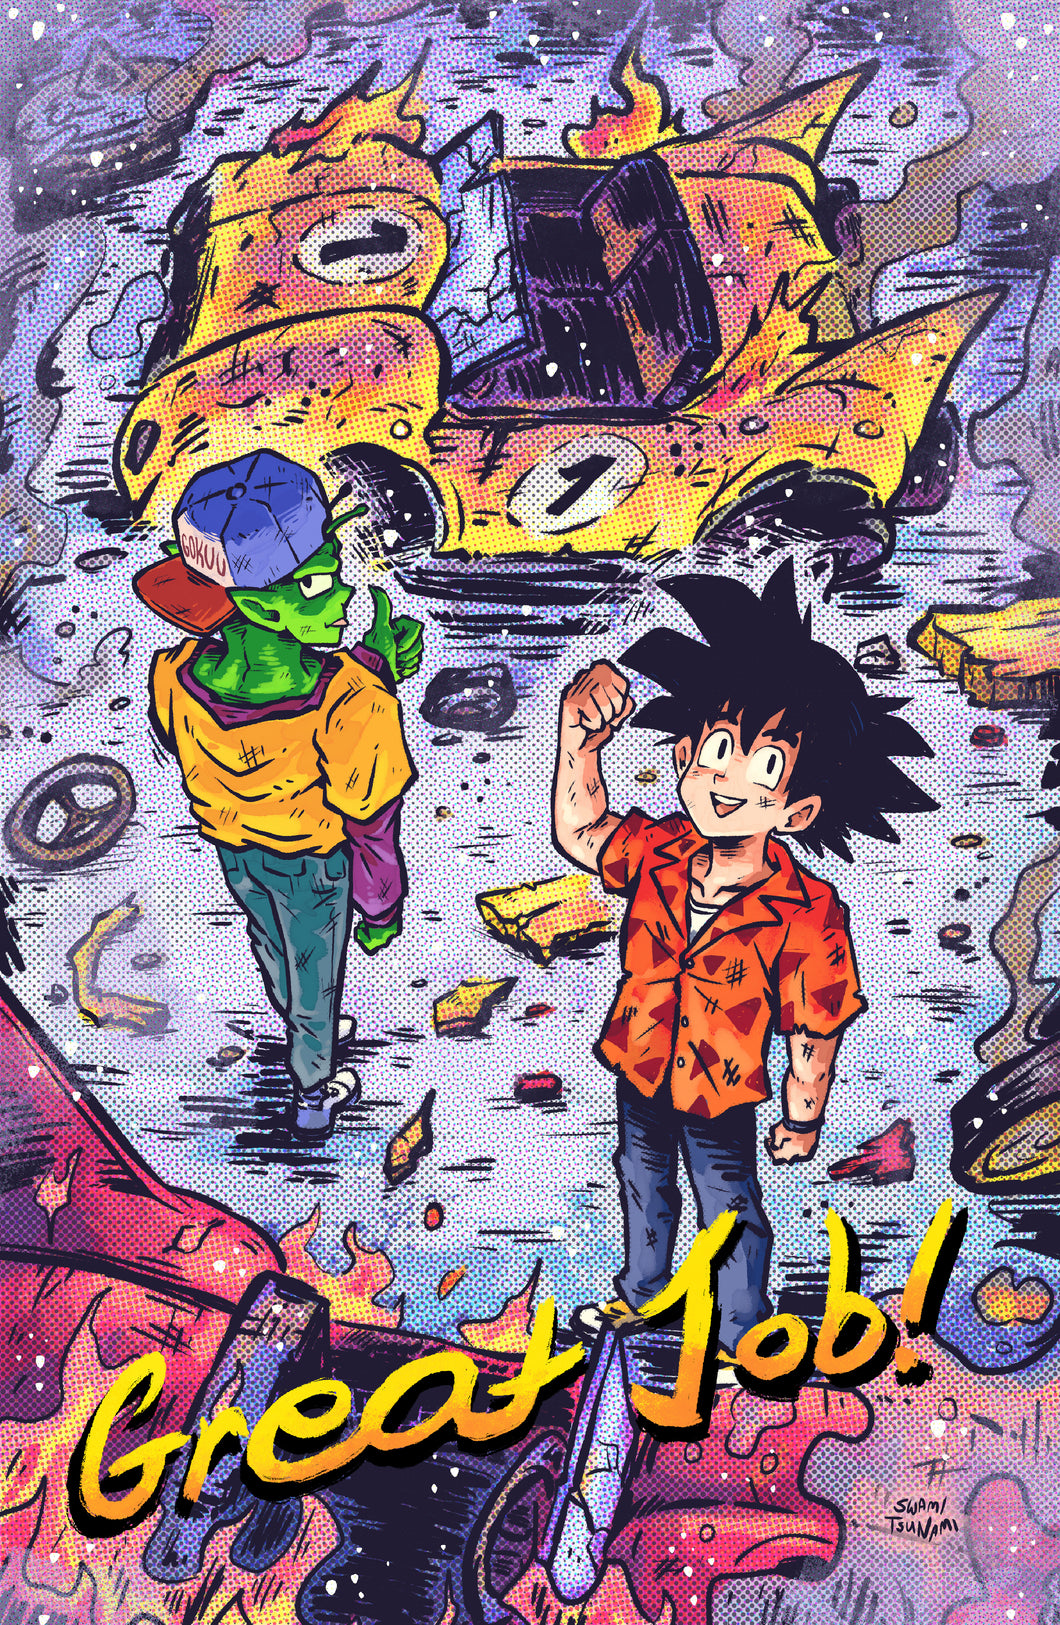 Goku and Piccolo Driving School - 11 x 17 Poster Print